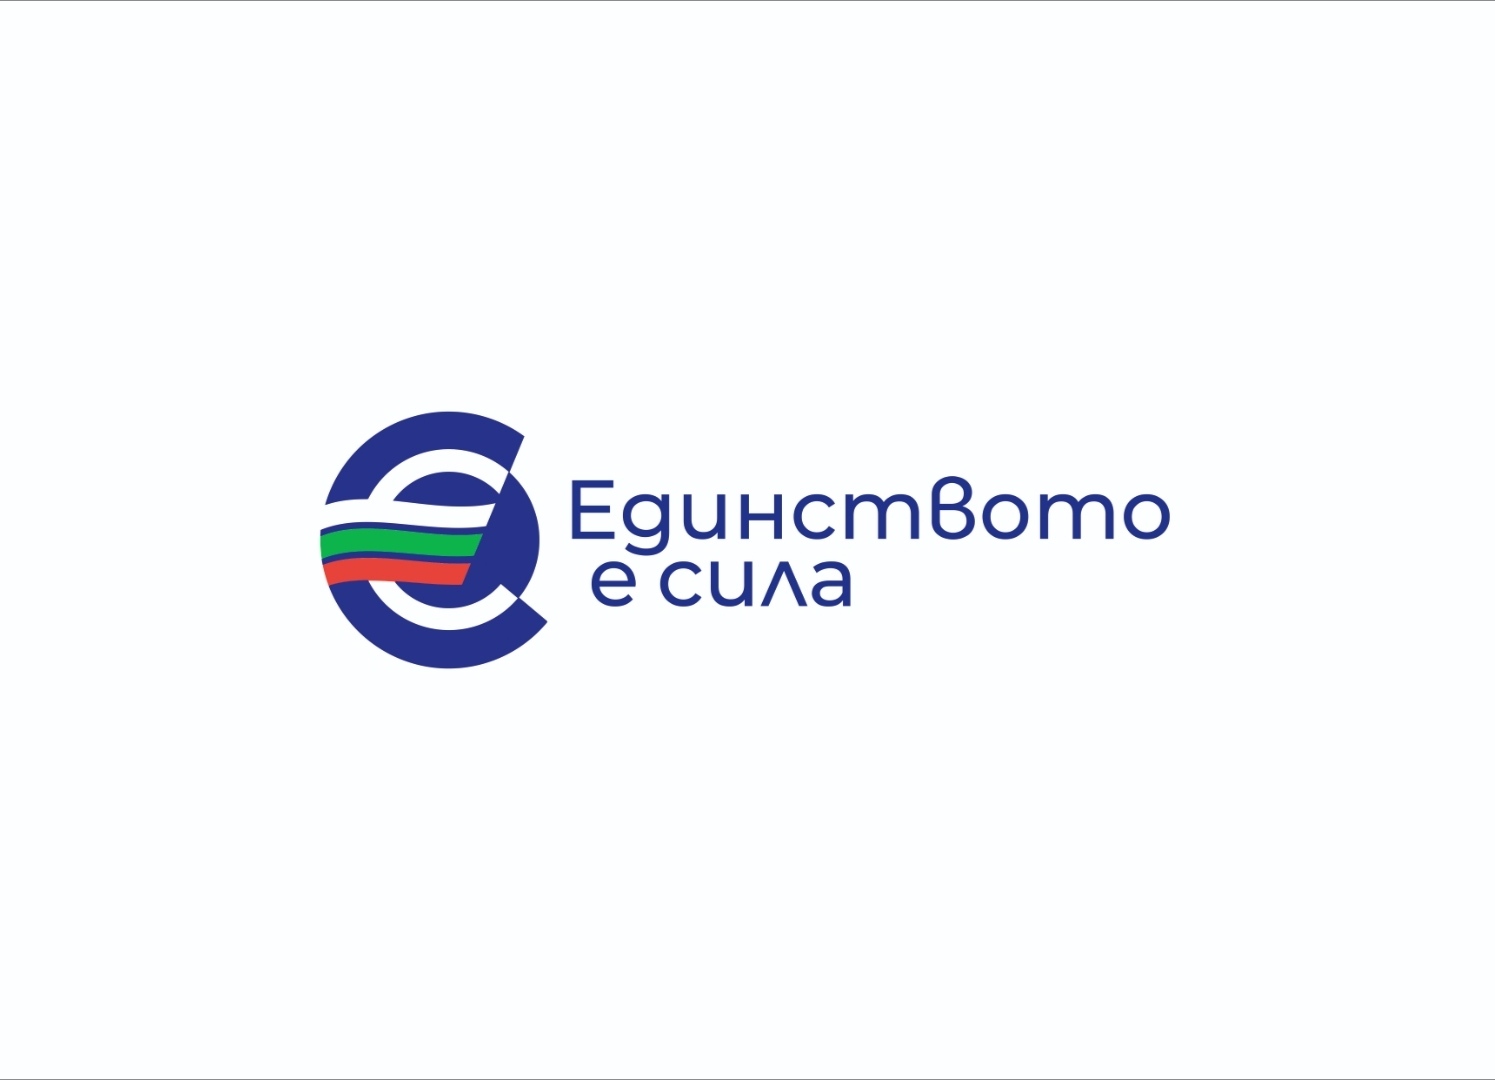 A YOUNG TEACHER CREATED THE LOGO FOR BULGARIA’S ACCESSION TO THE EUROZONE